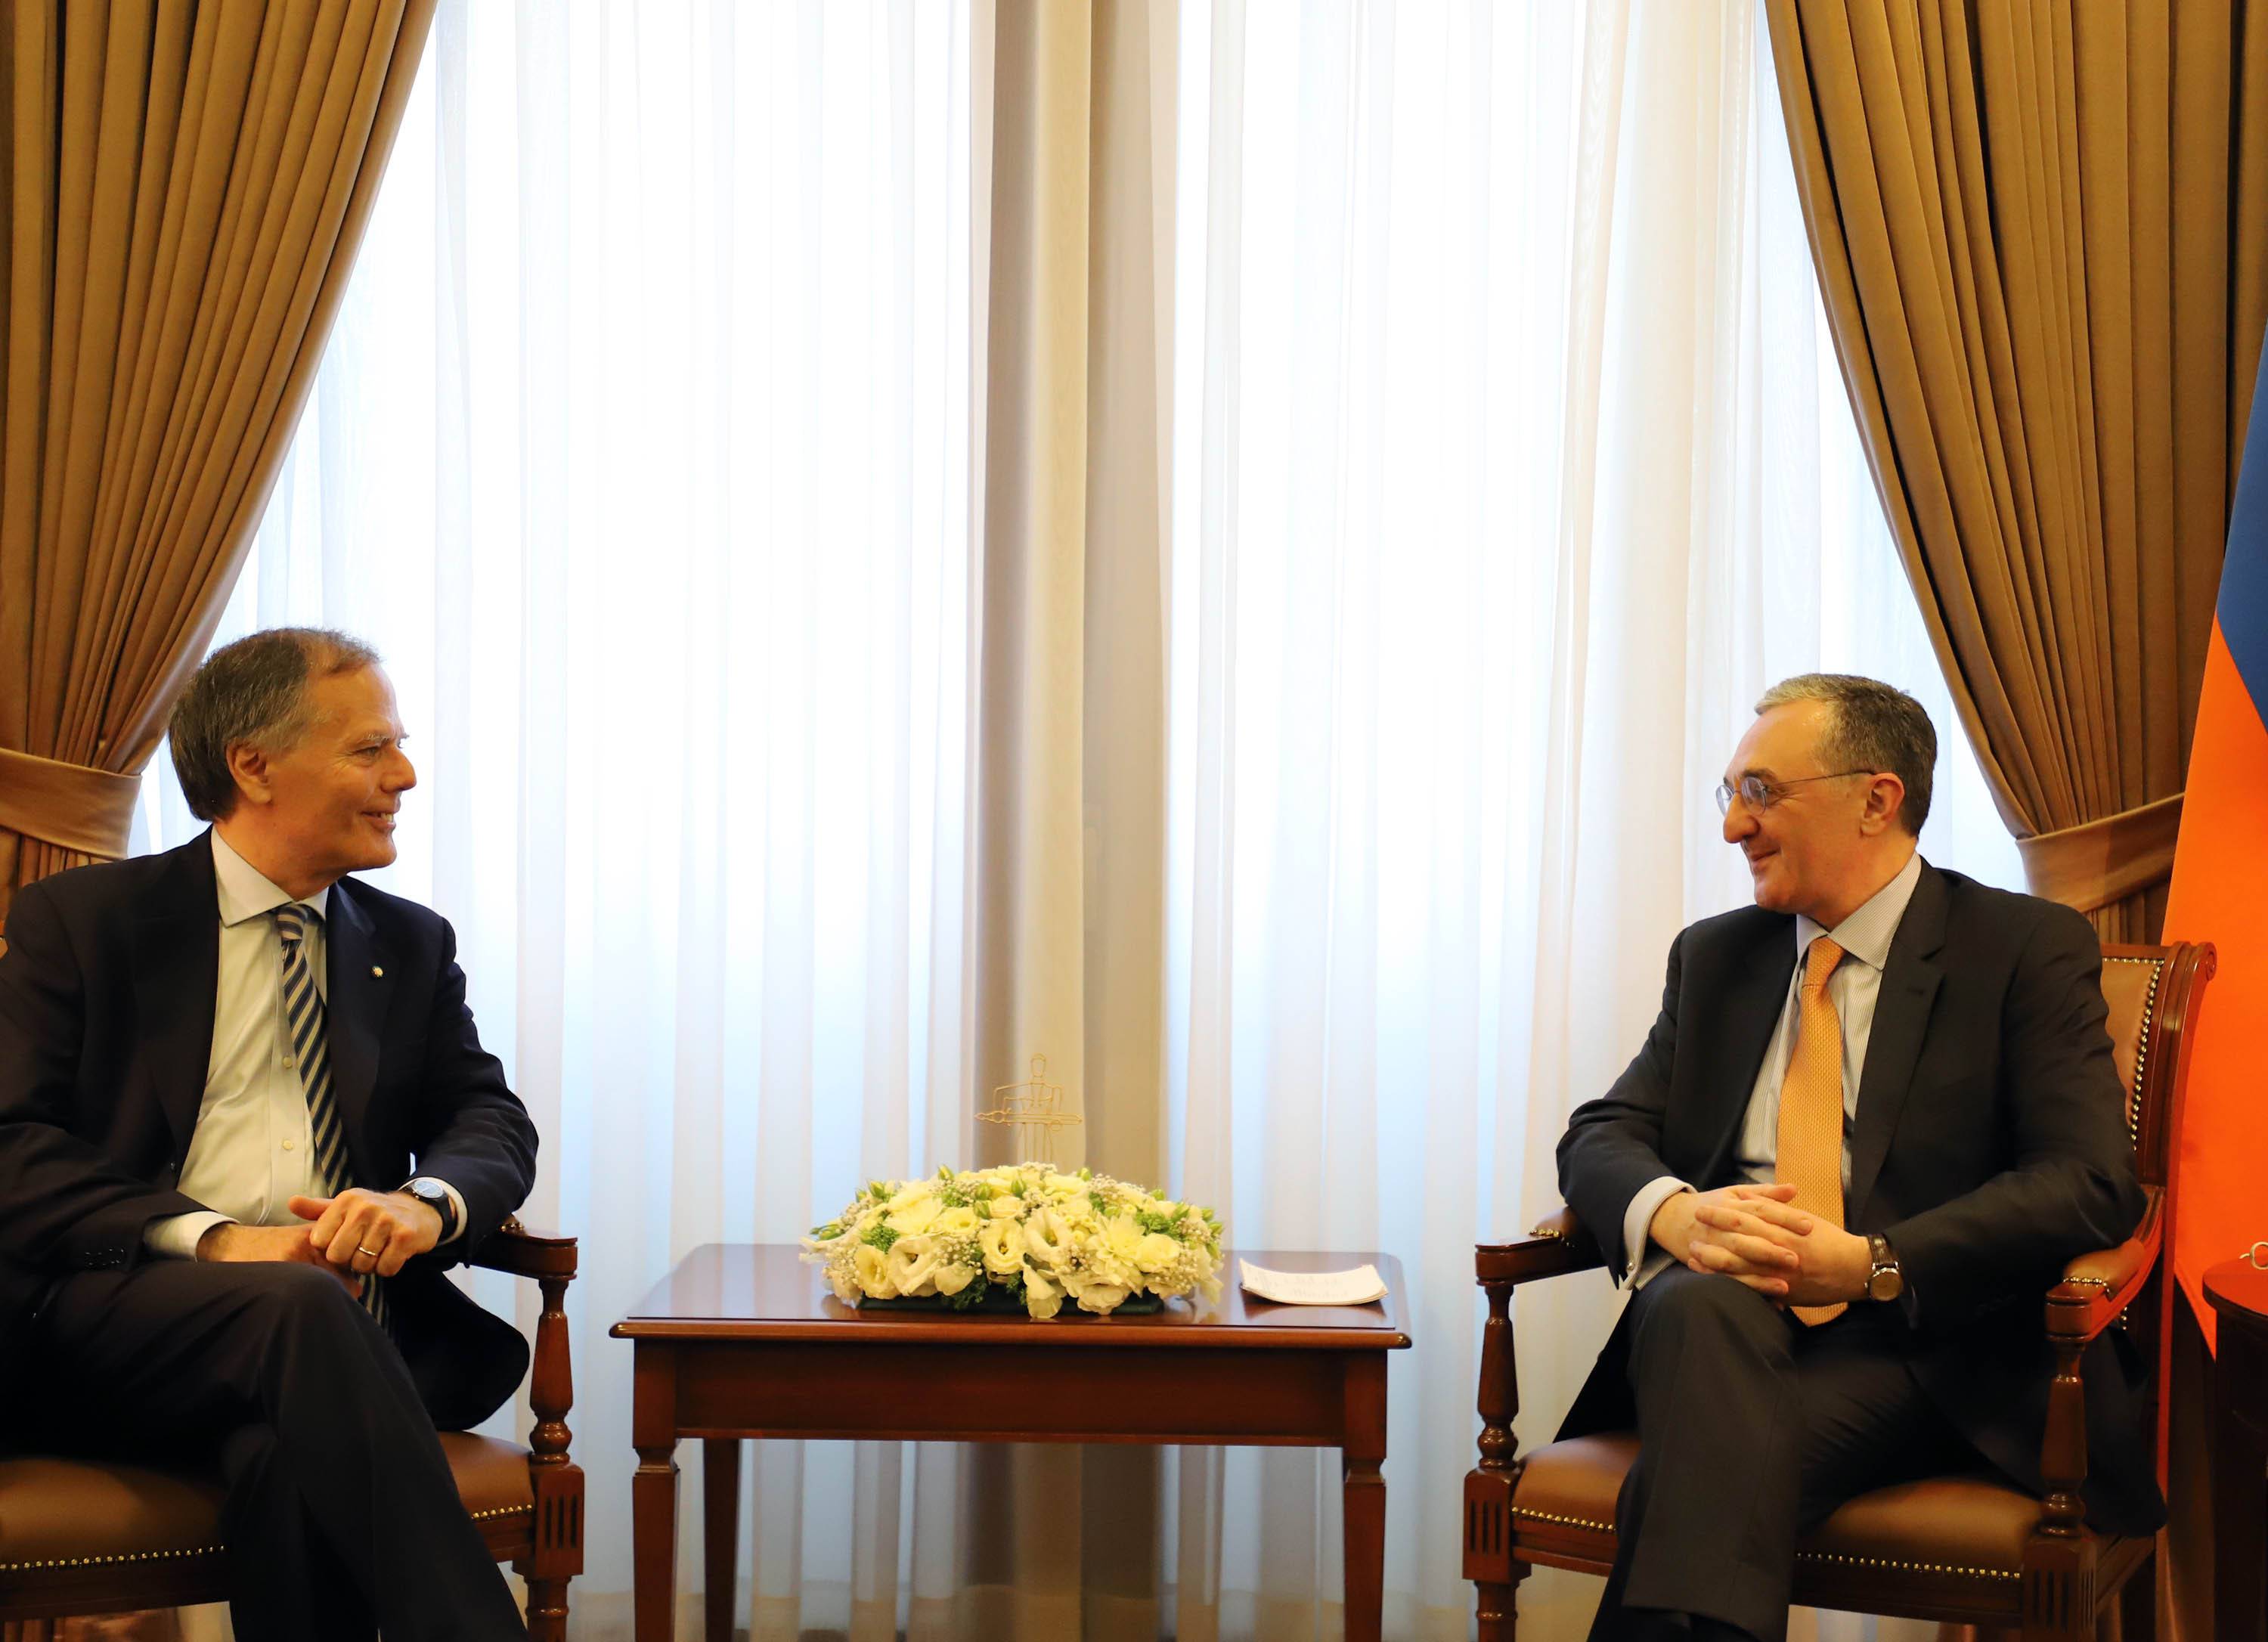 Foreign Minister Zohrab Mnatsakanyan met Enzo Milanesi, Minister of Foreign Affairs and International Cooperation of Italy